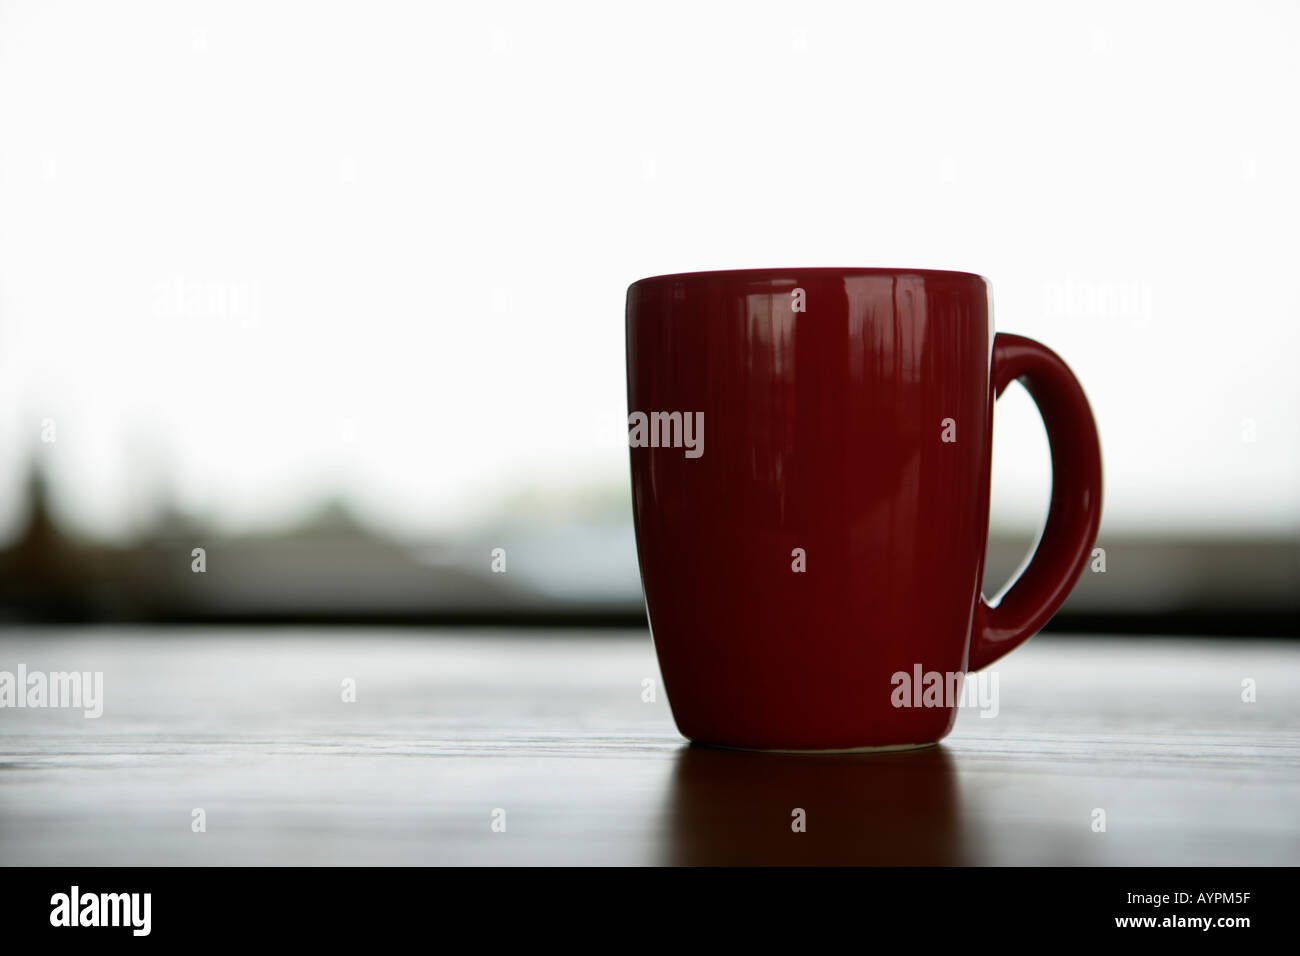 A red mug placed on a wooden table Stock Photo